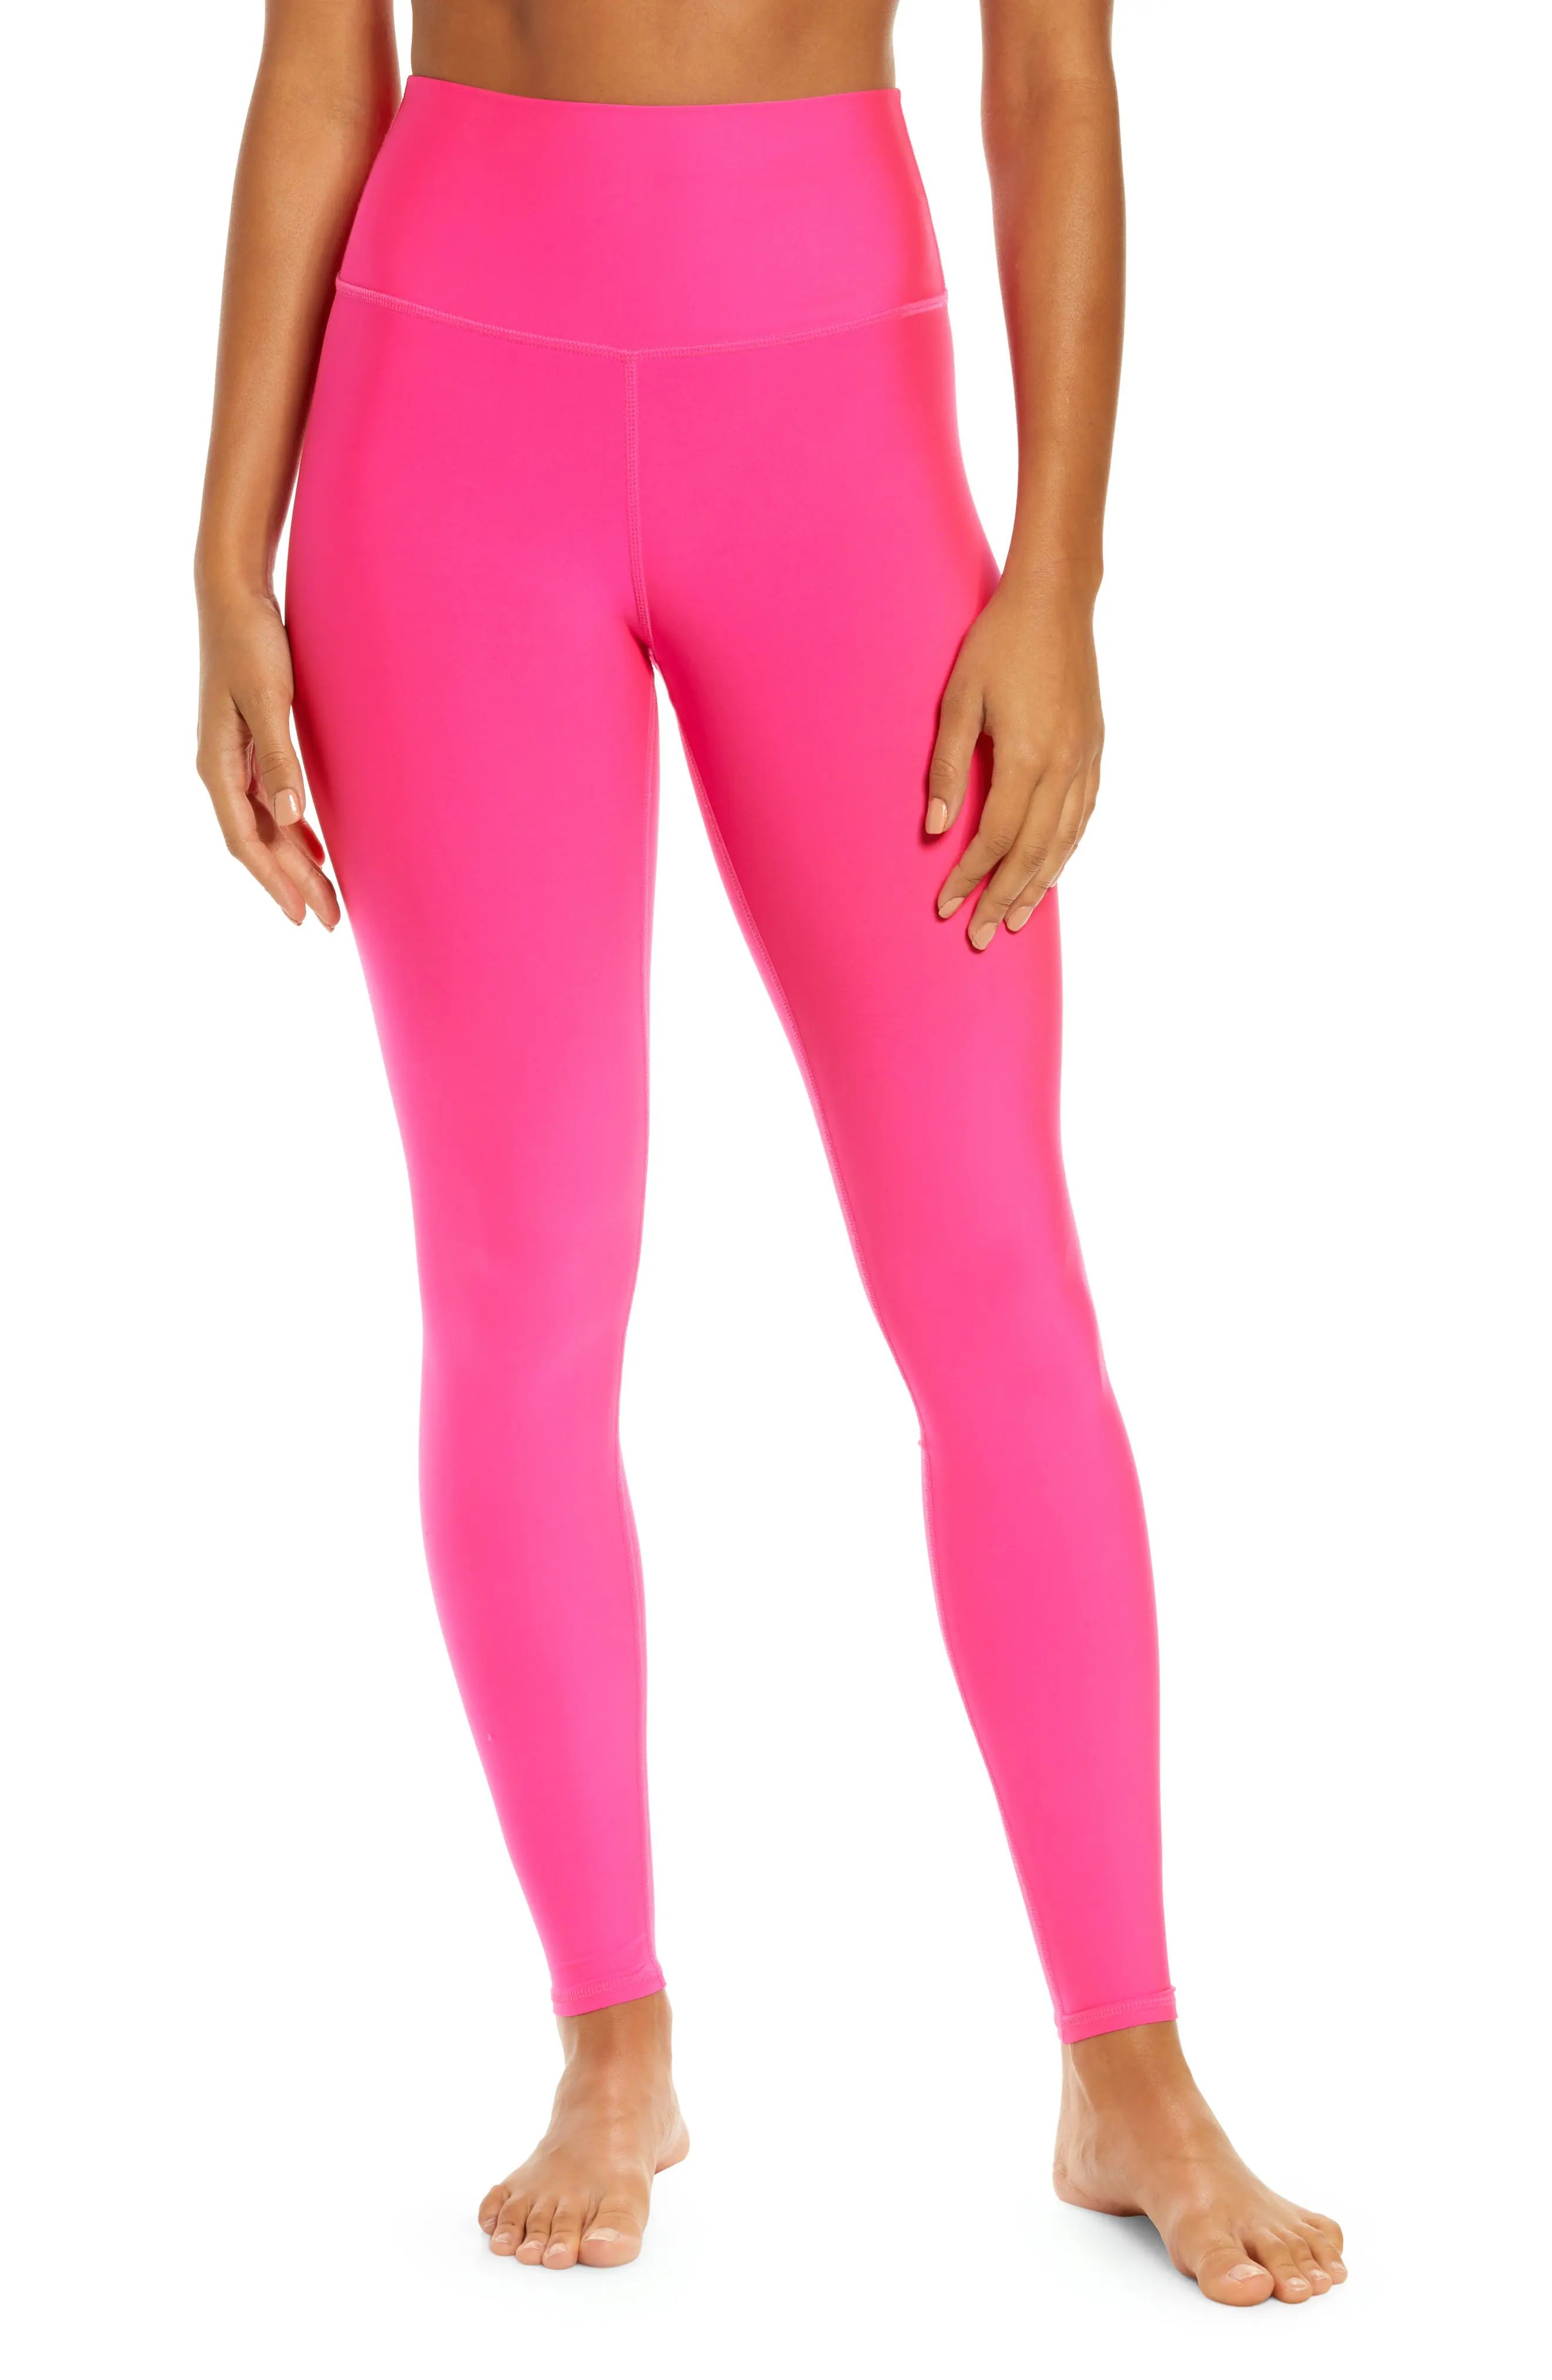 Alo Airlift High Waist Leggings in Neon Pink at Nordstrom, Size Xx-Small | Nordstrom